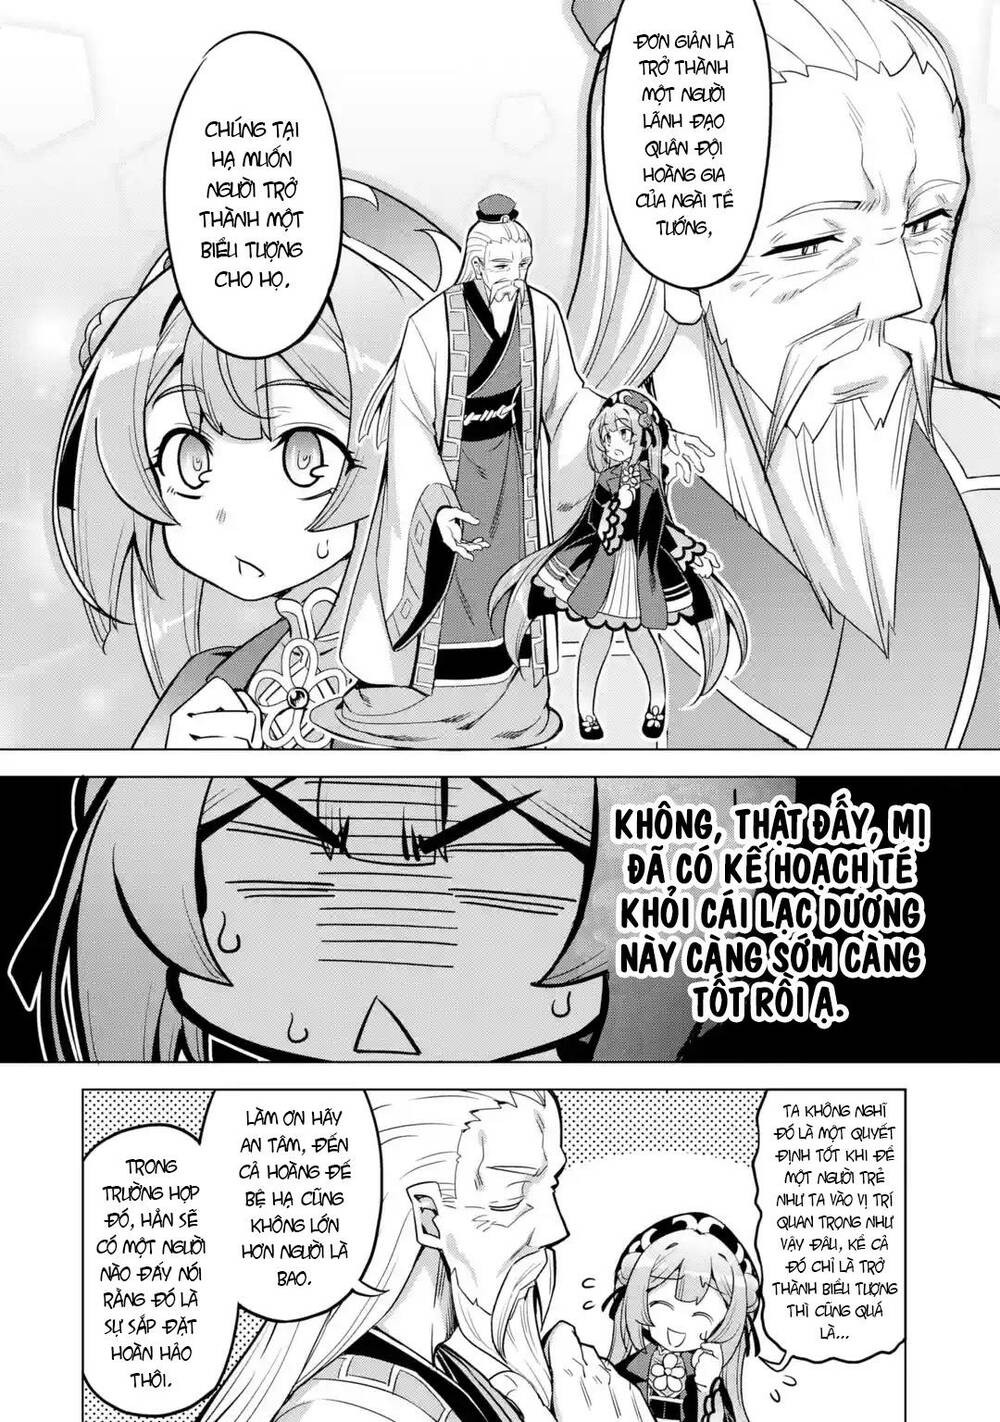 Awakening in the Three Kingdoms as the Demon's Daughter ~The Legend of Dong Bai~: Chapter 9